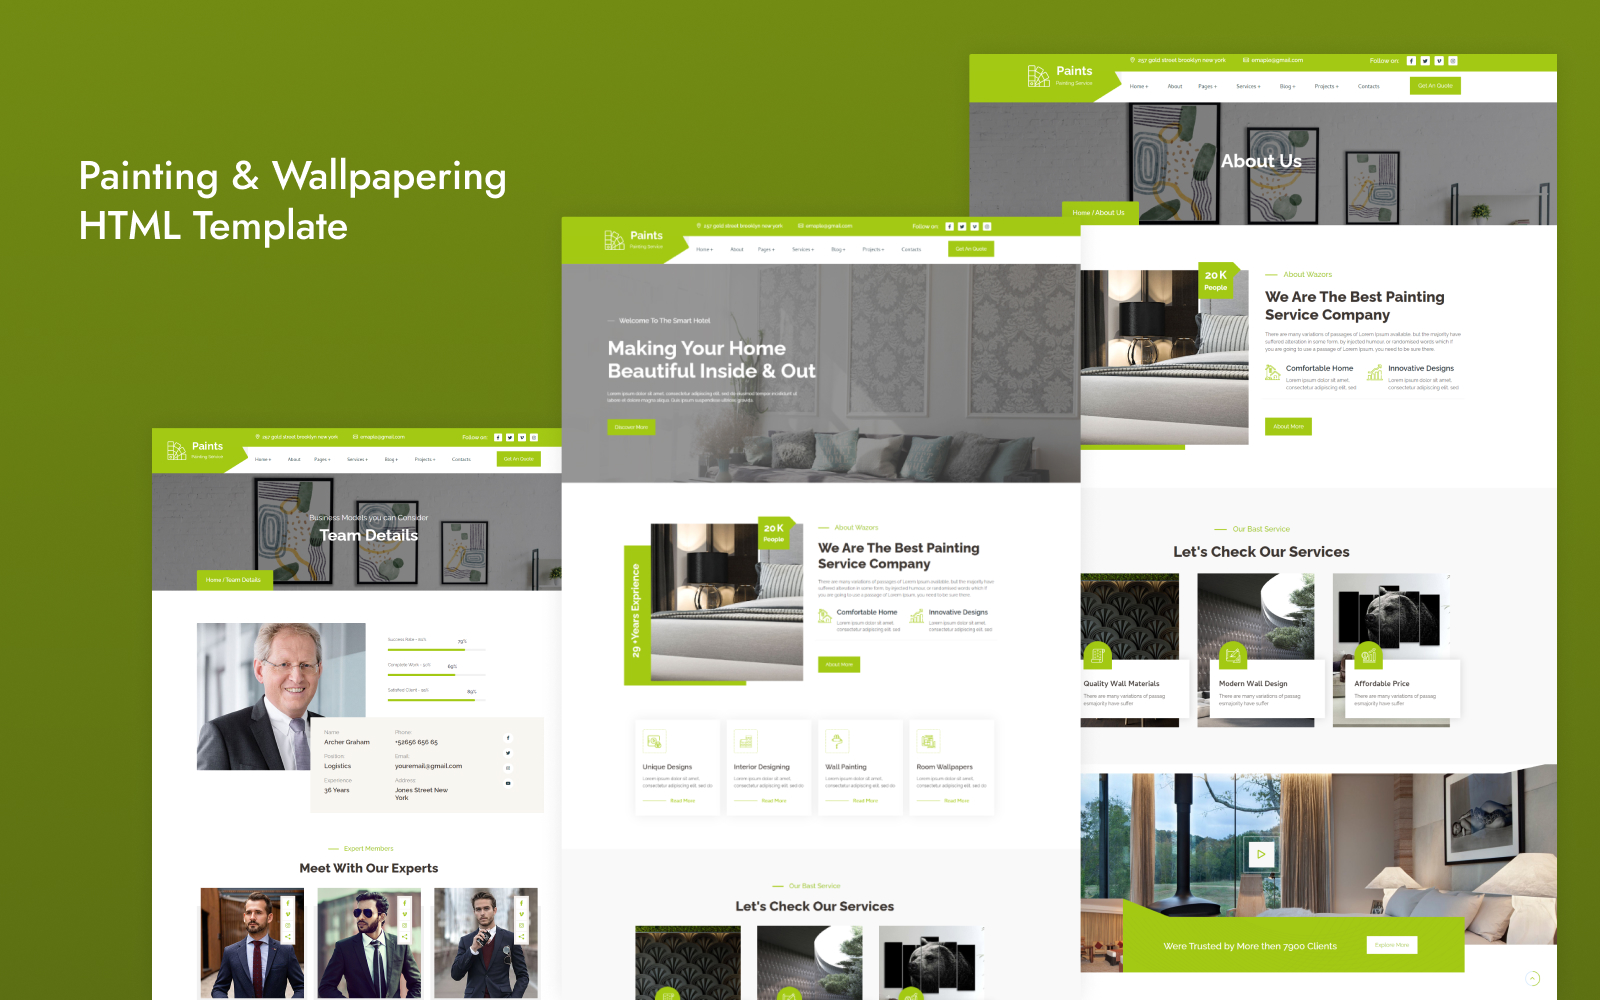 Paints-Painting & Wallpapering HTML Template